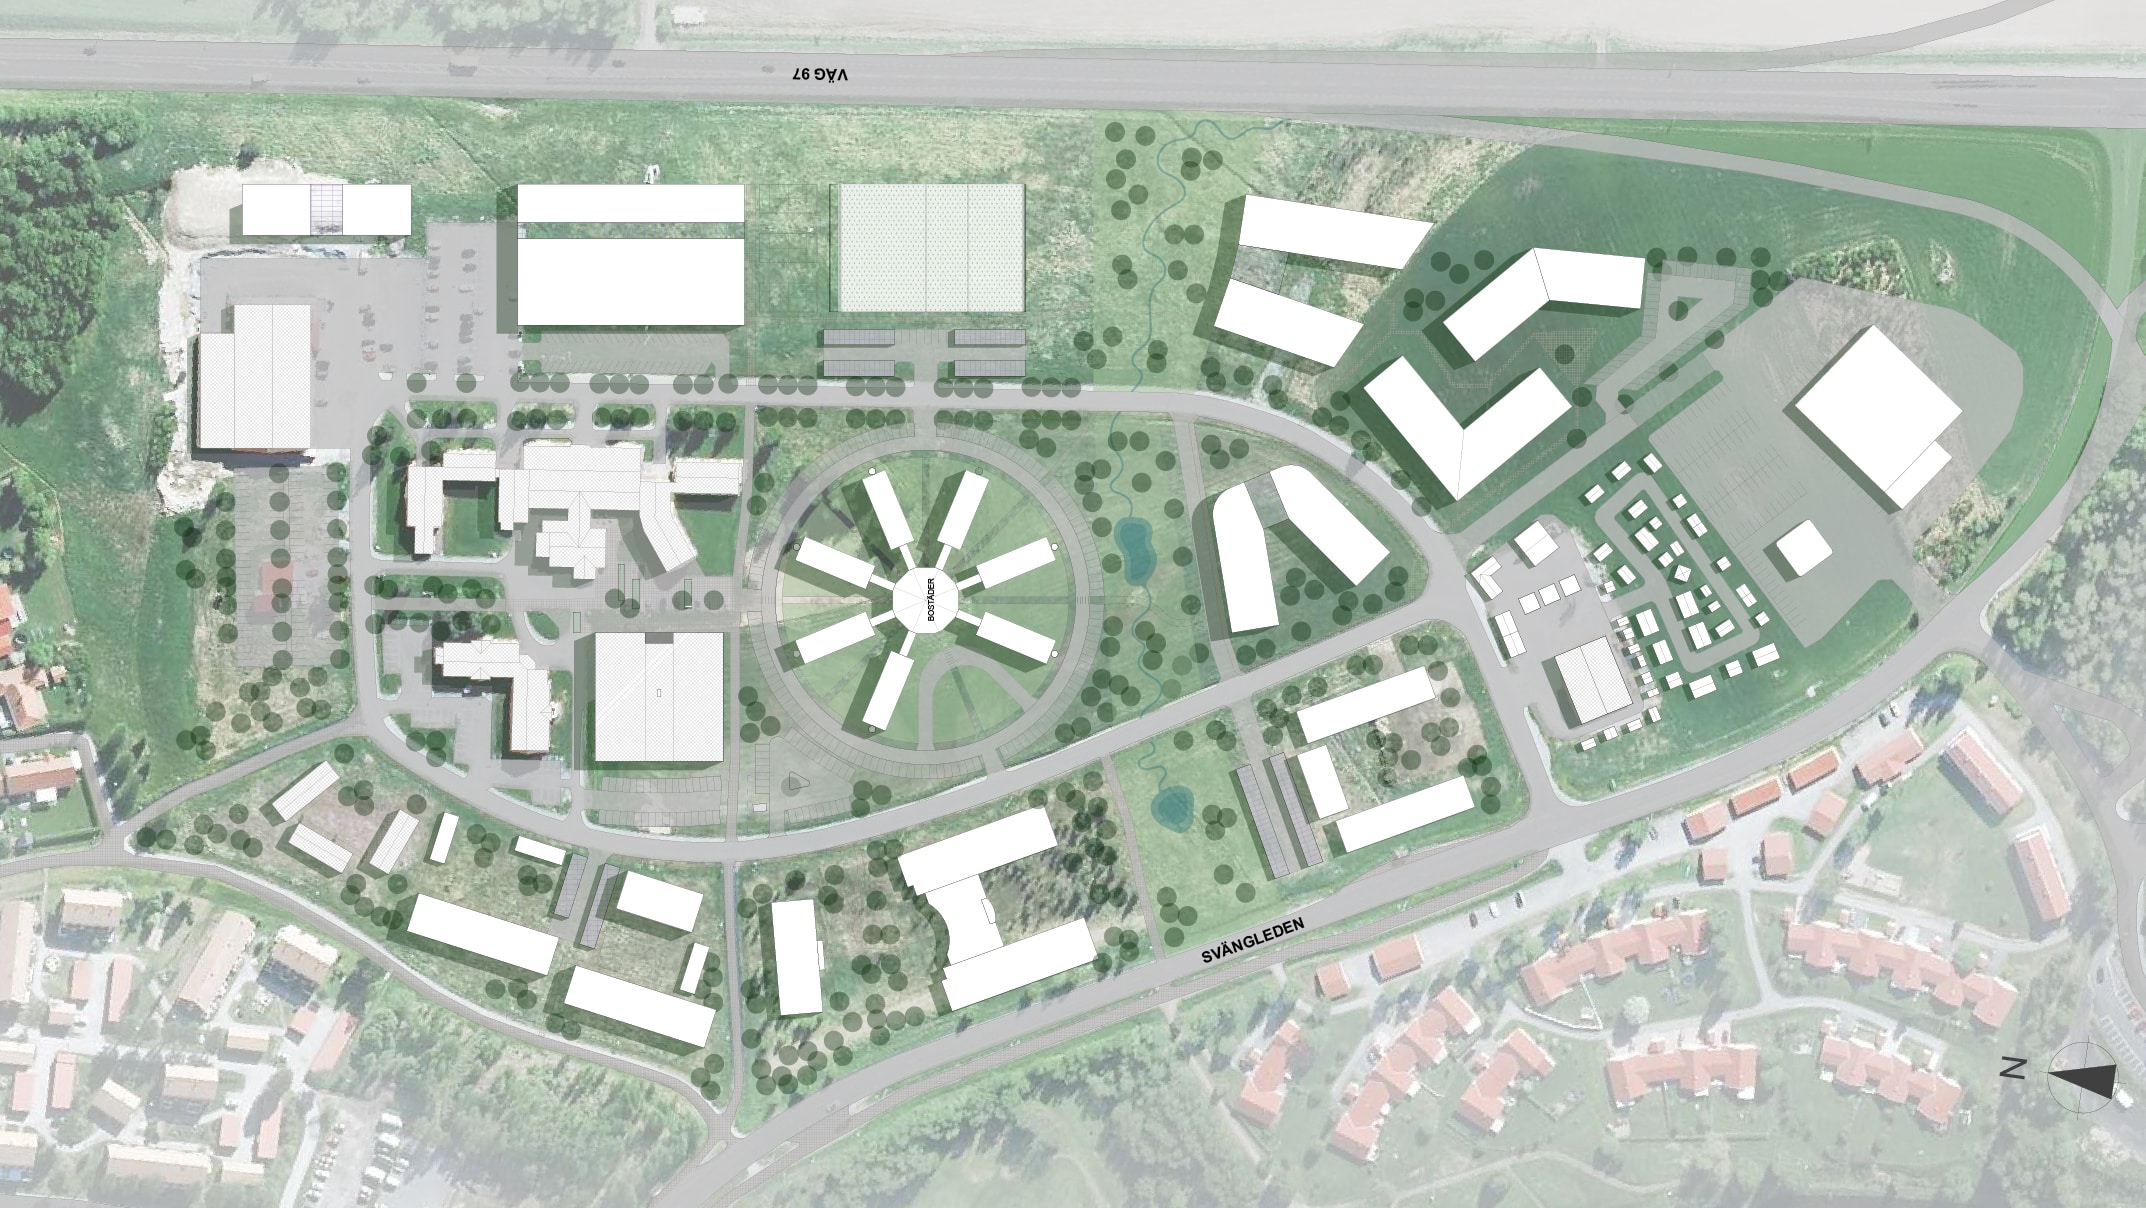 Sketch of how the area at Boden Business Park can be developed in the near future according to the adopted detailed plan.